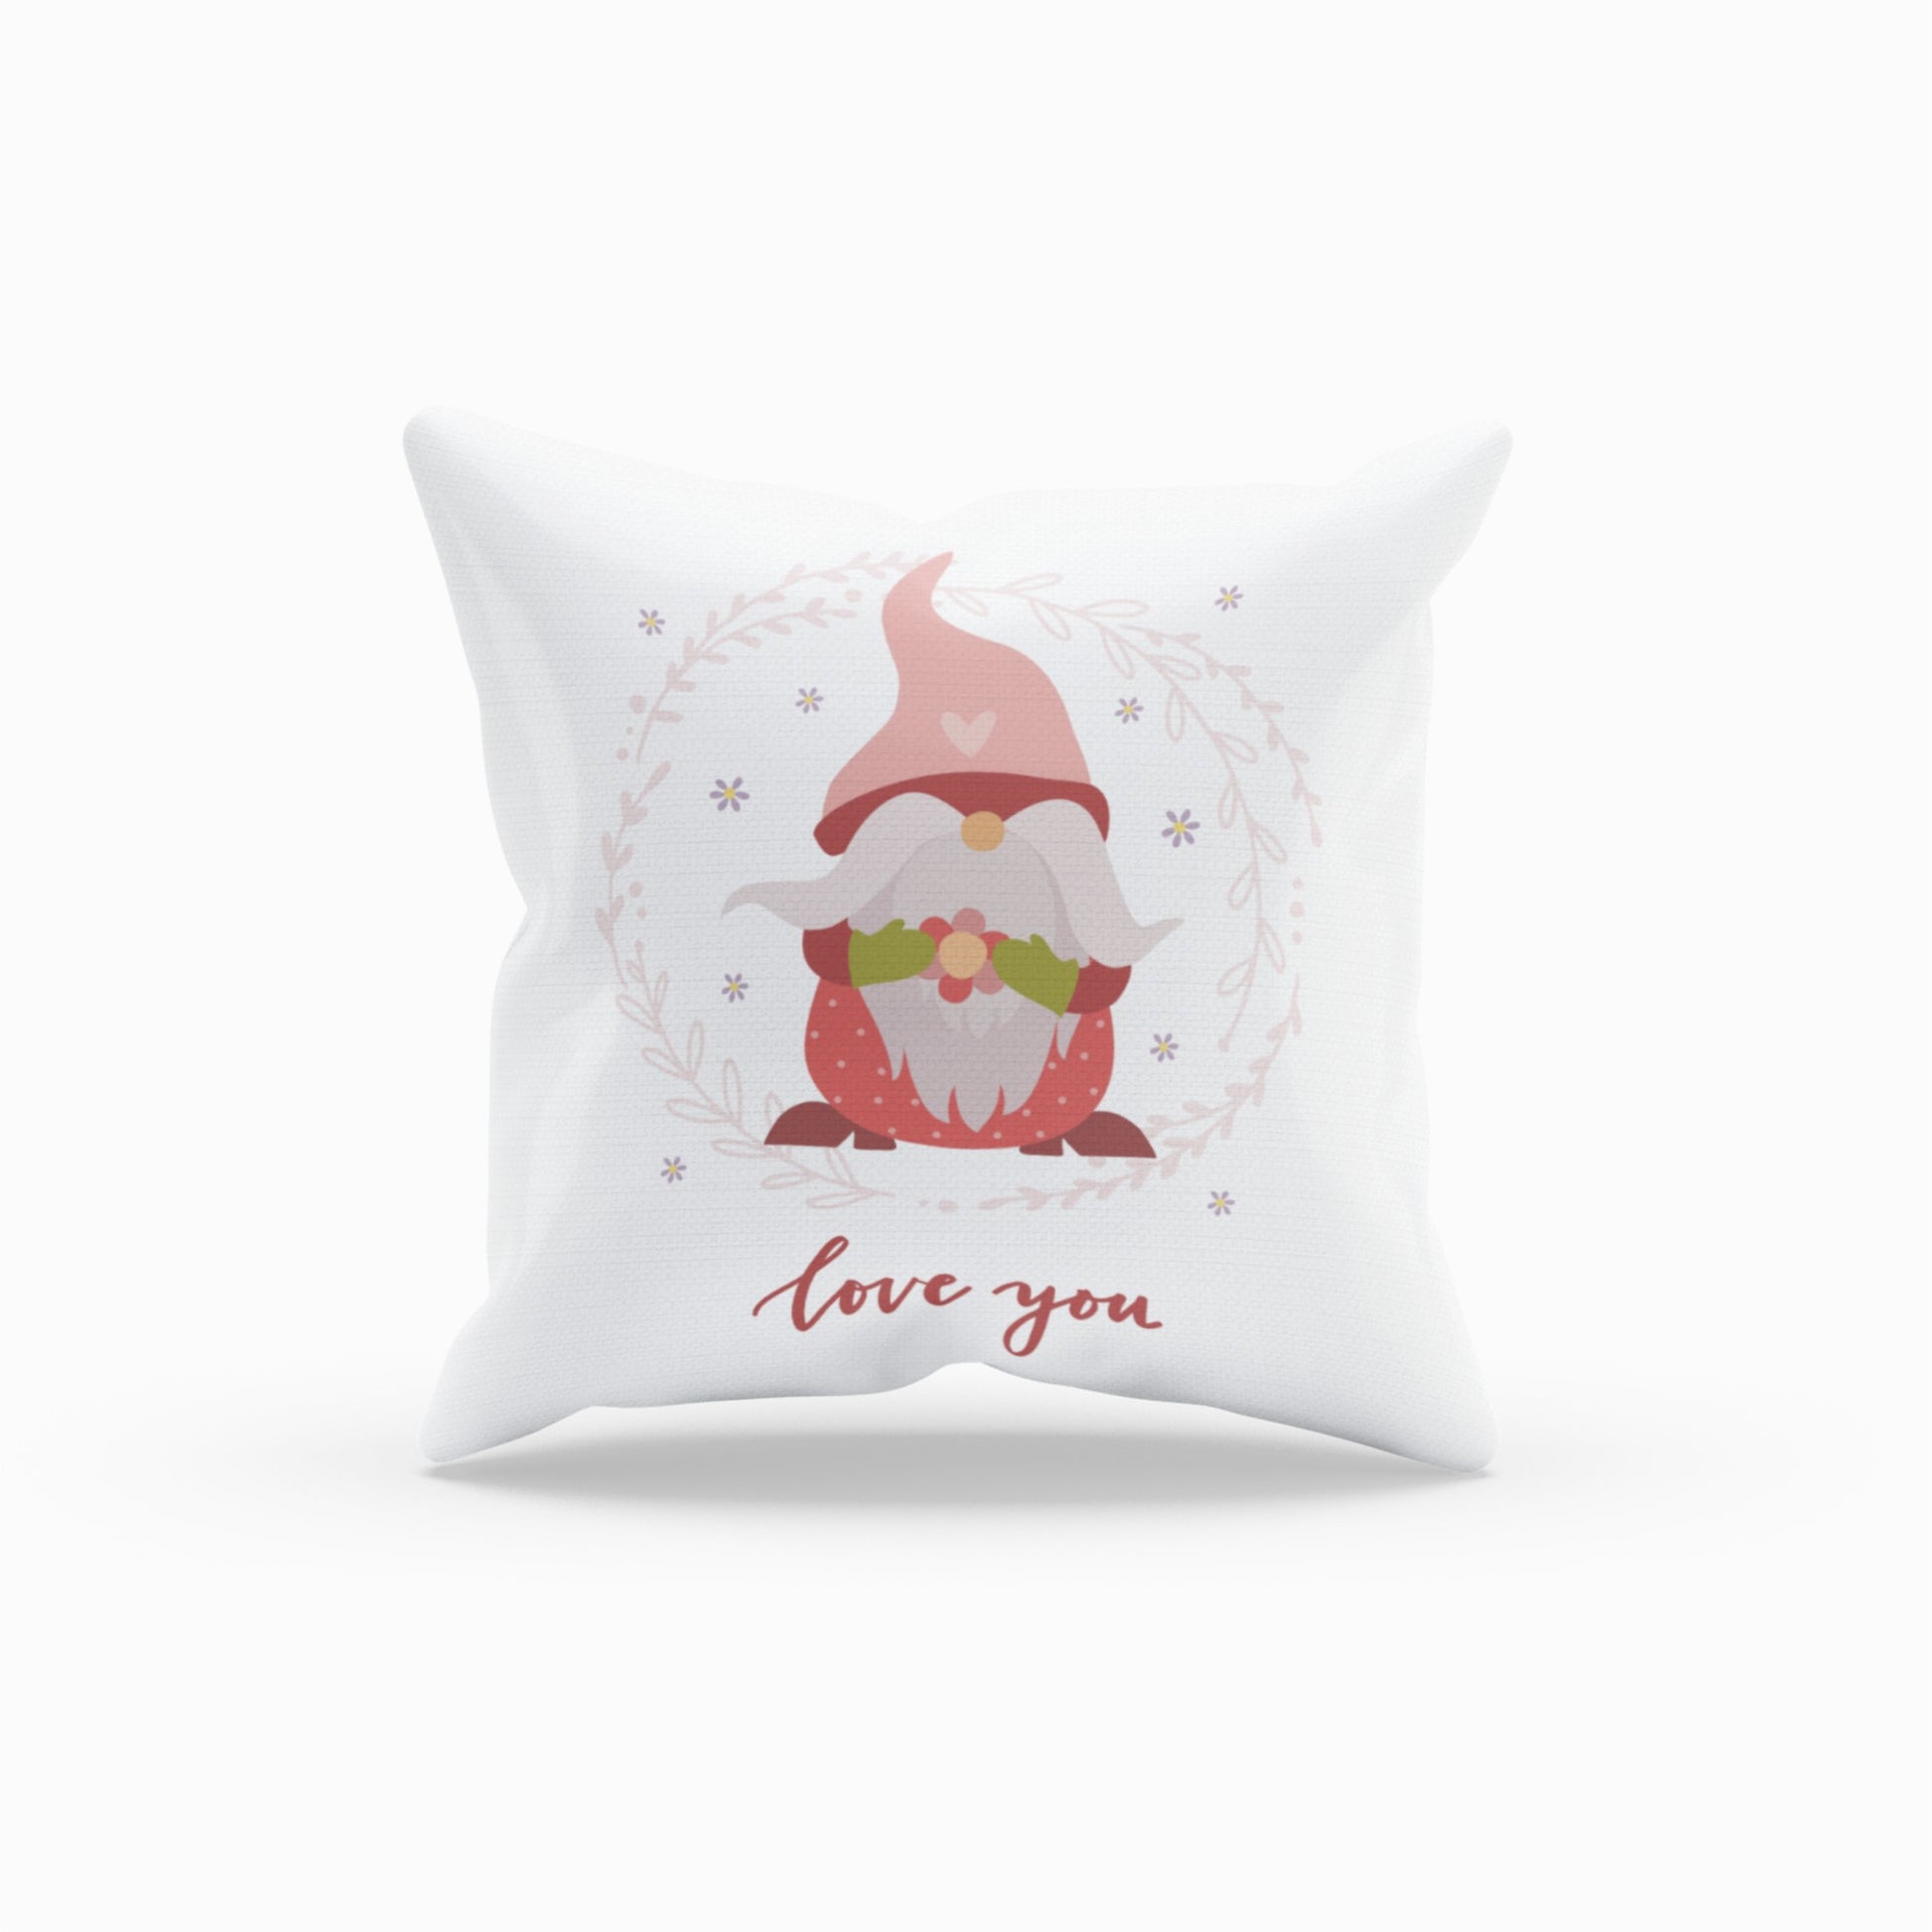 Pillow with Whimsical Gnome Illustrations